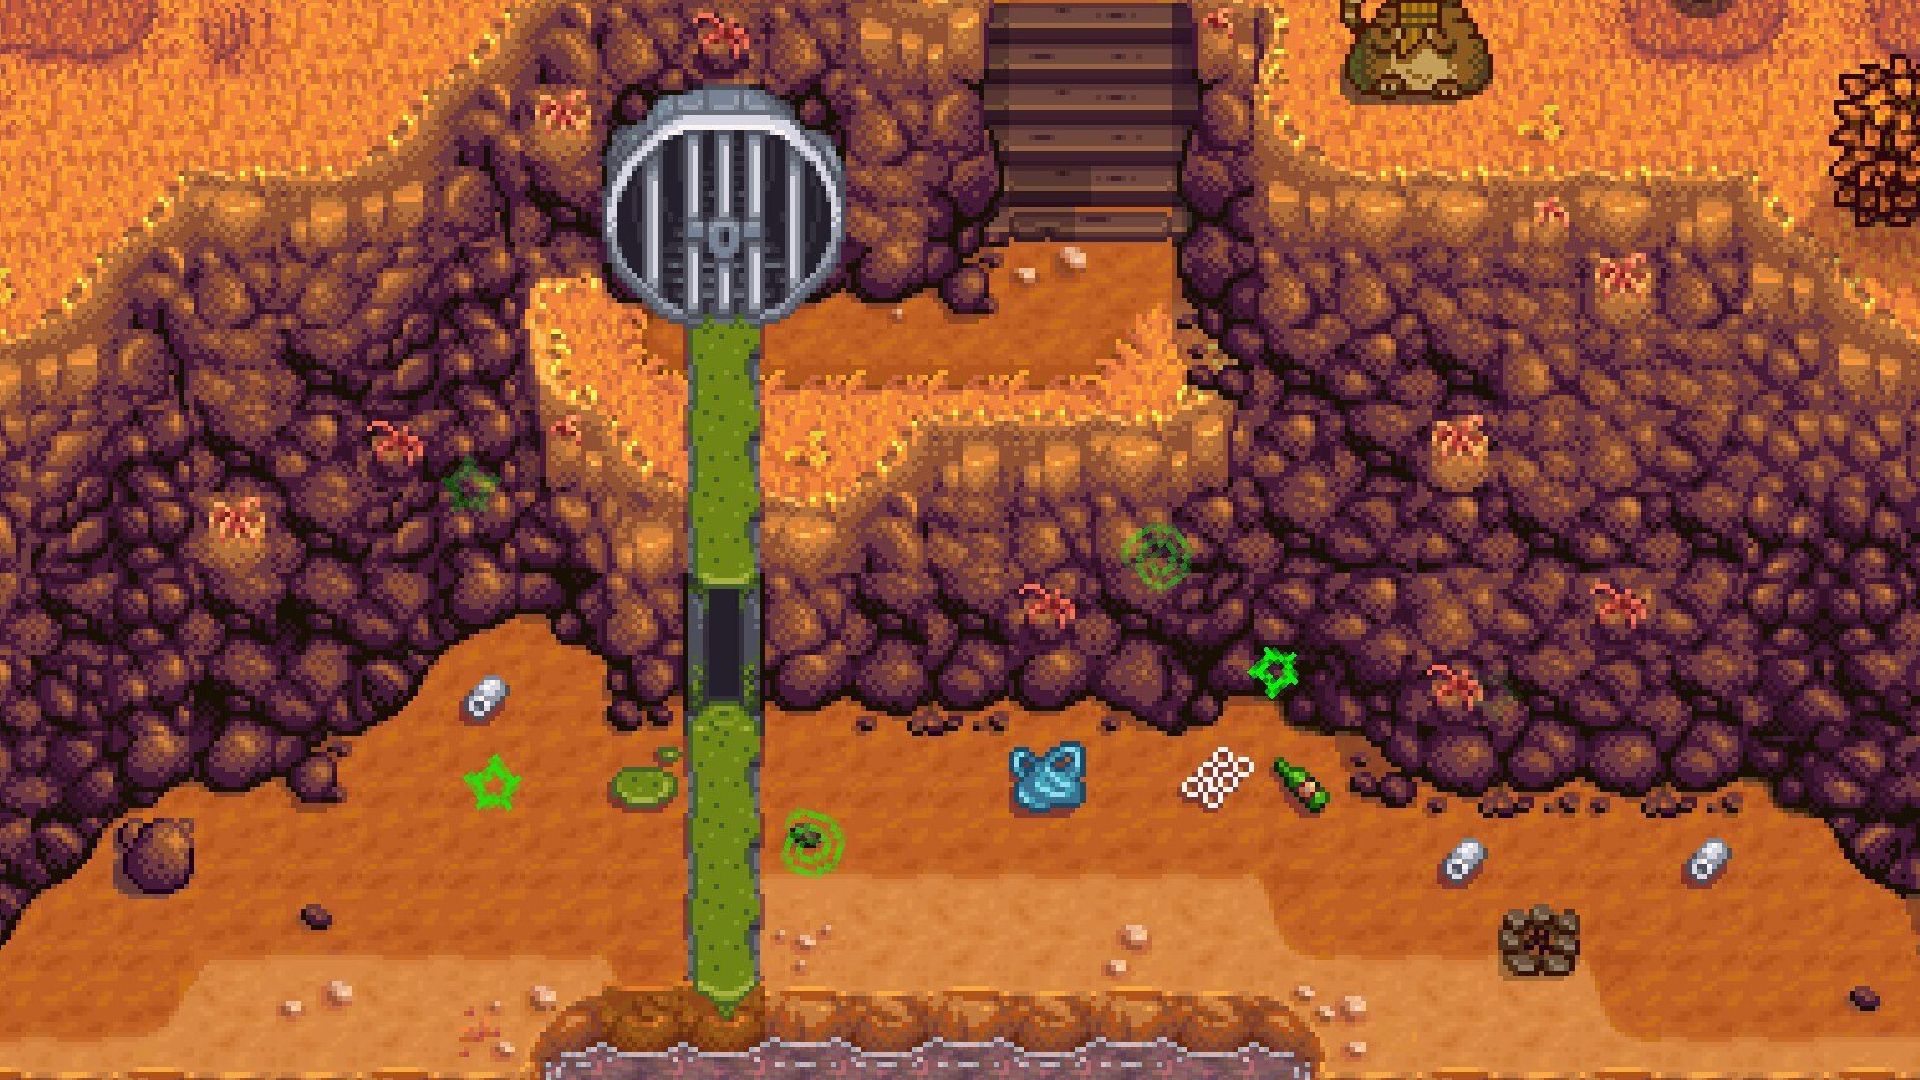 stardew valley sewer before cleaned up by trash bear